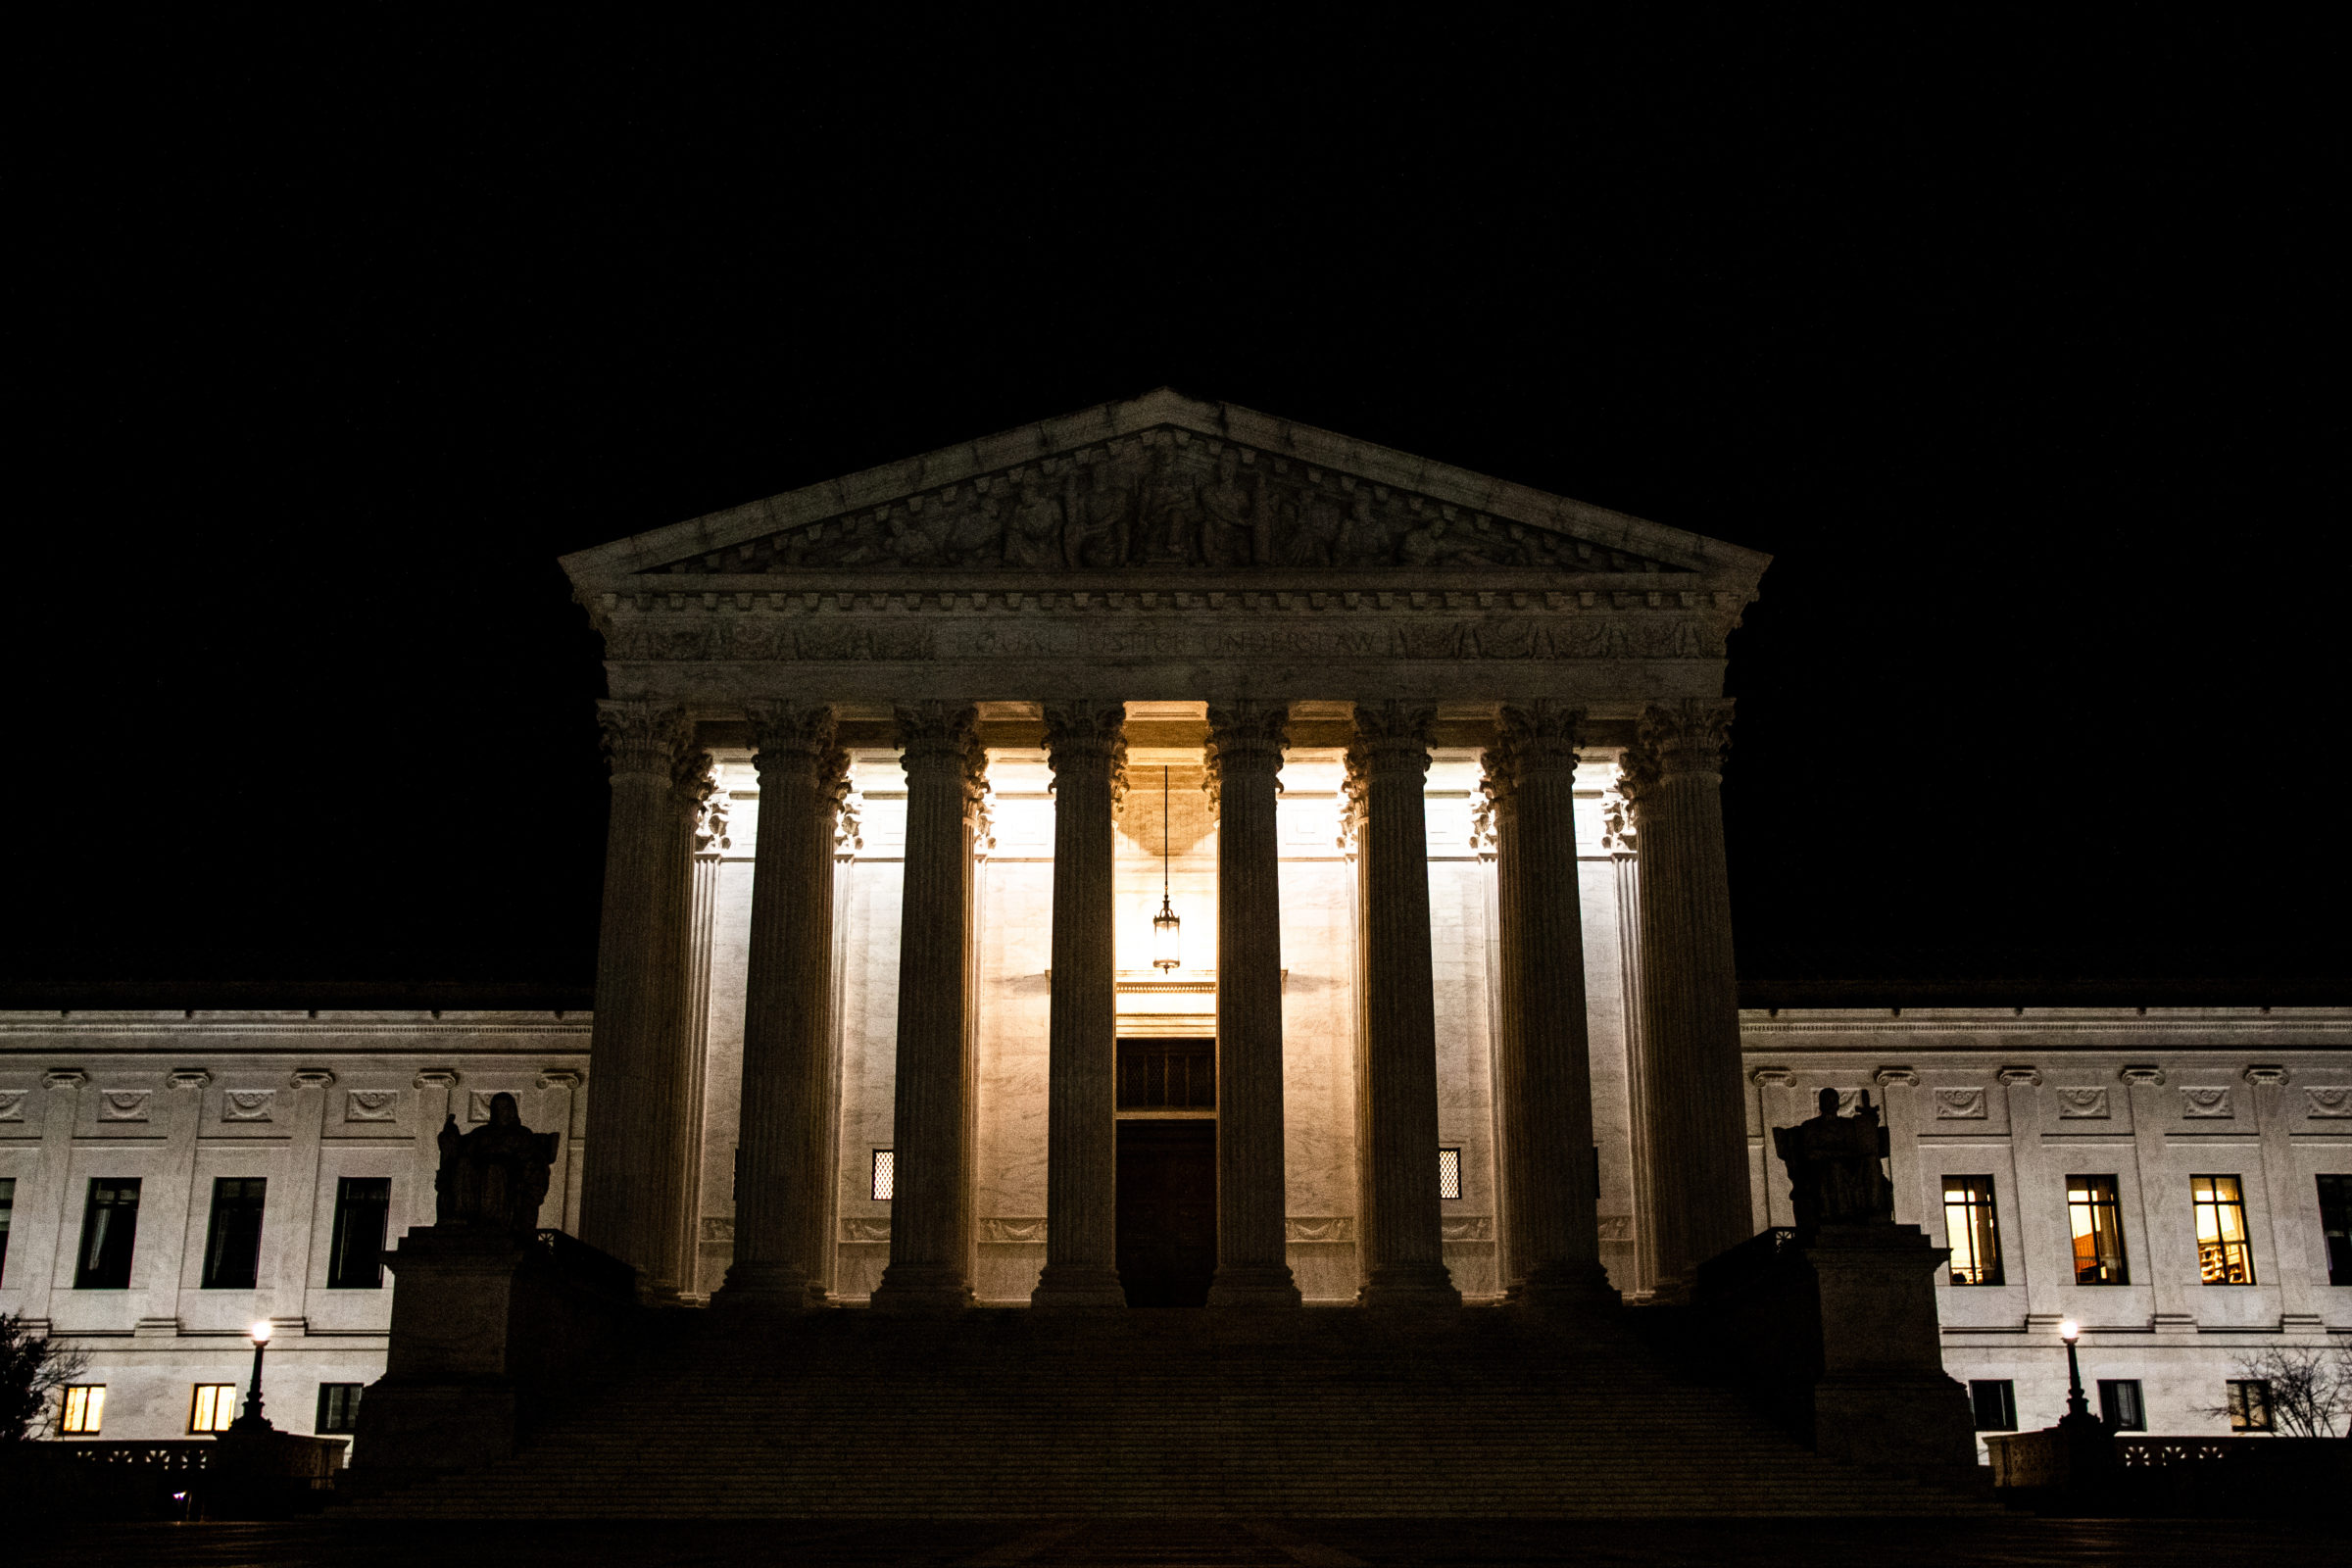 Night view of the Supreme Court Building in Washington, United States